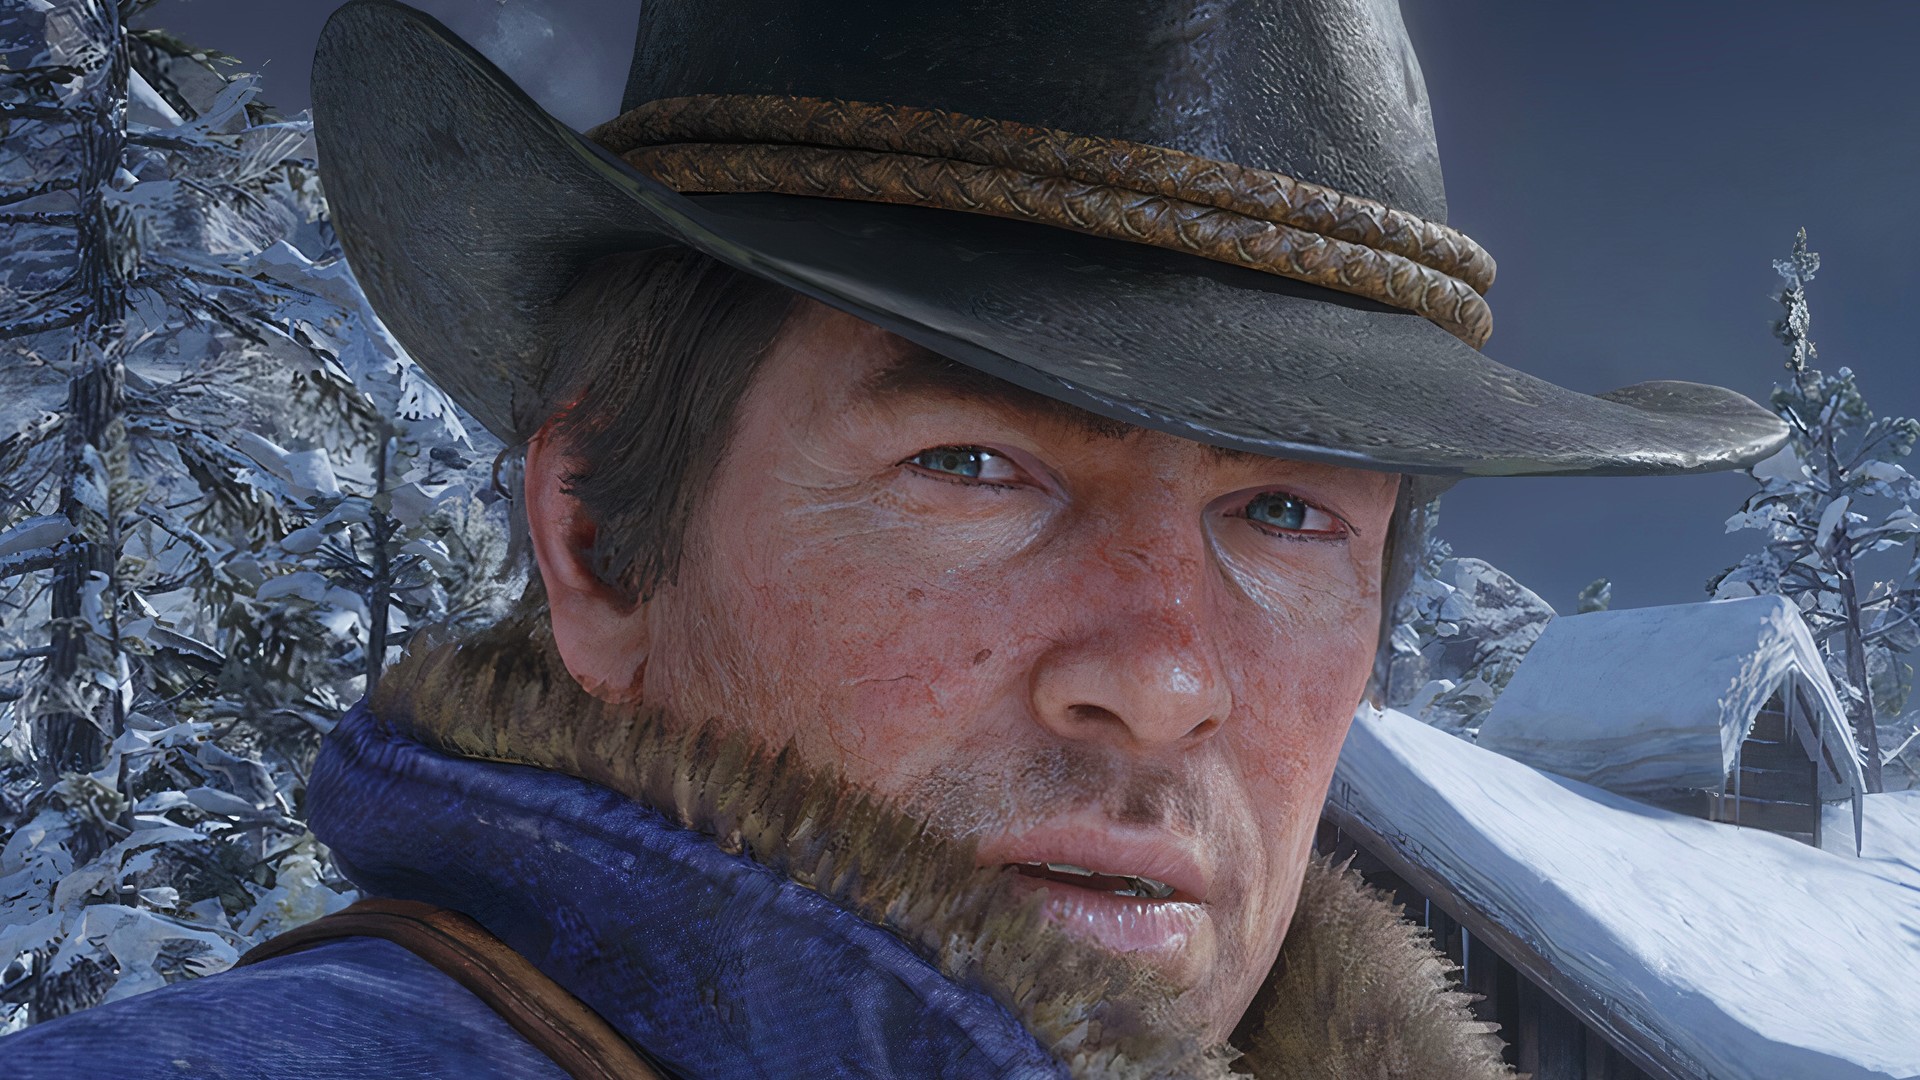 The Making of Rockstar Games' Red Dead Redemption 2